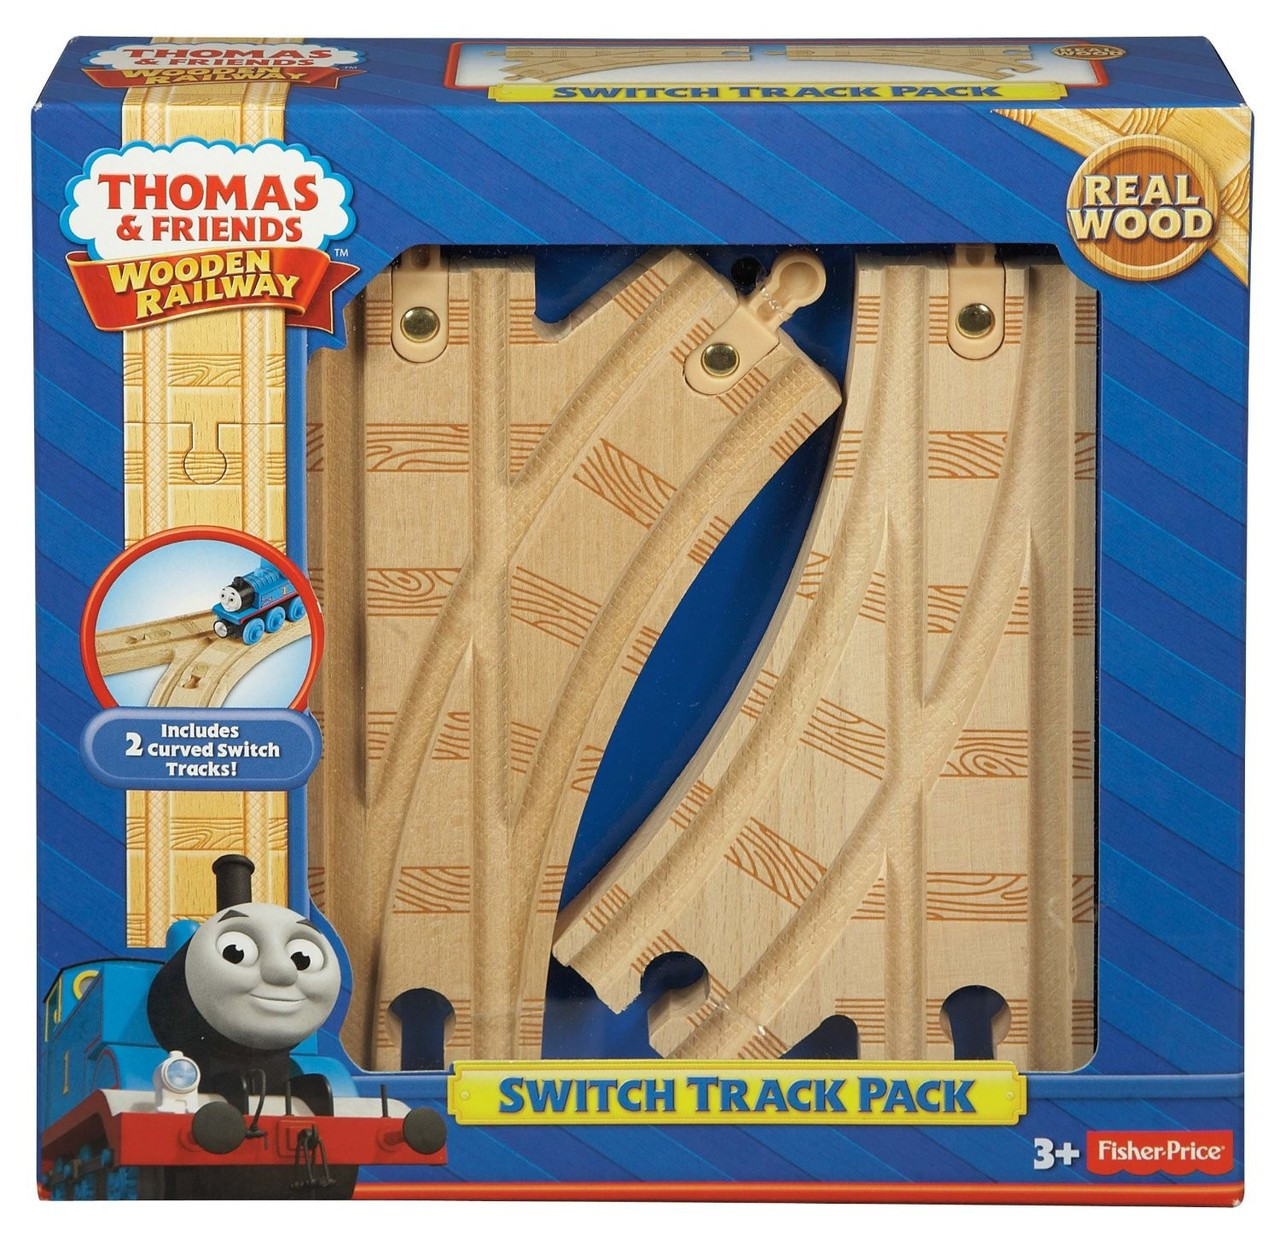 8 Way Switching Track New Wooden Train Railway Track 1PC For Thomas & Friend 